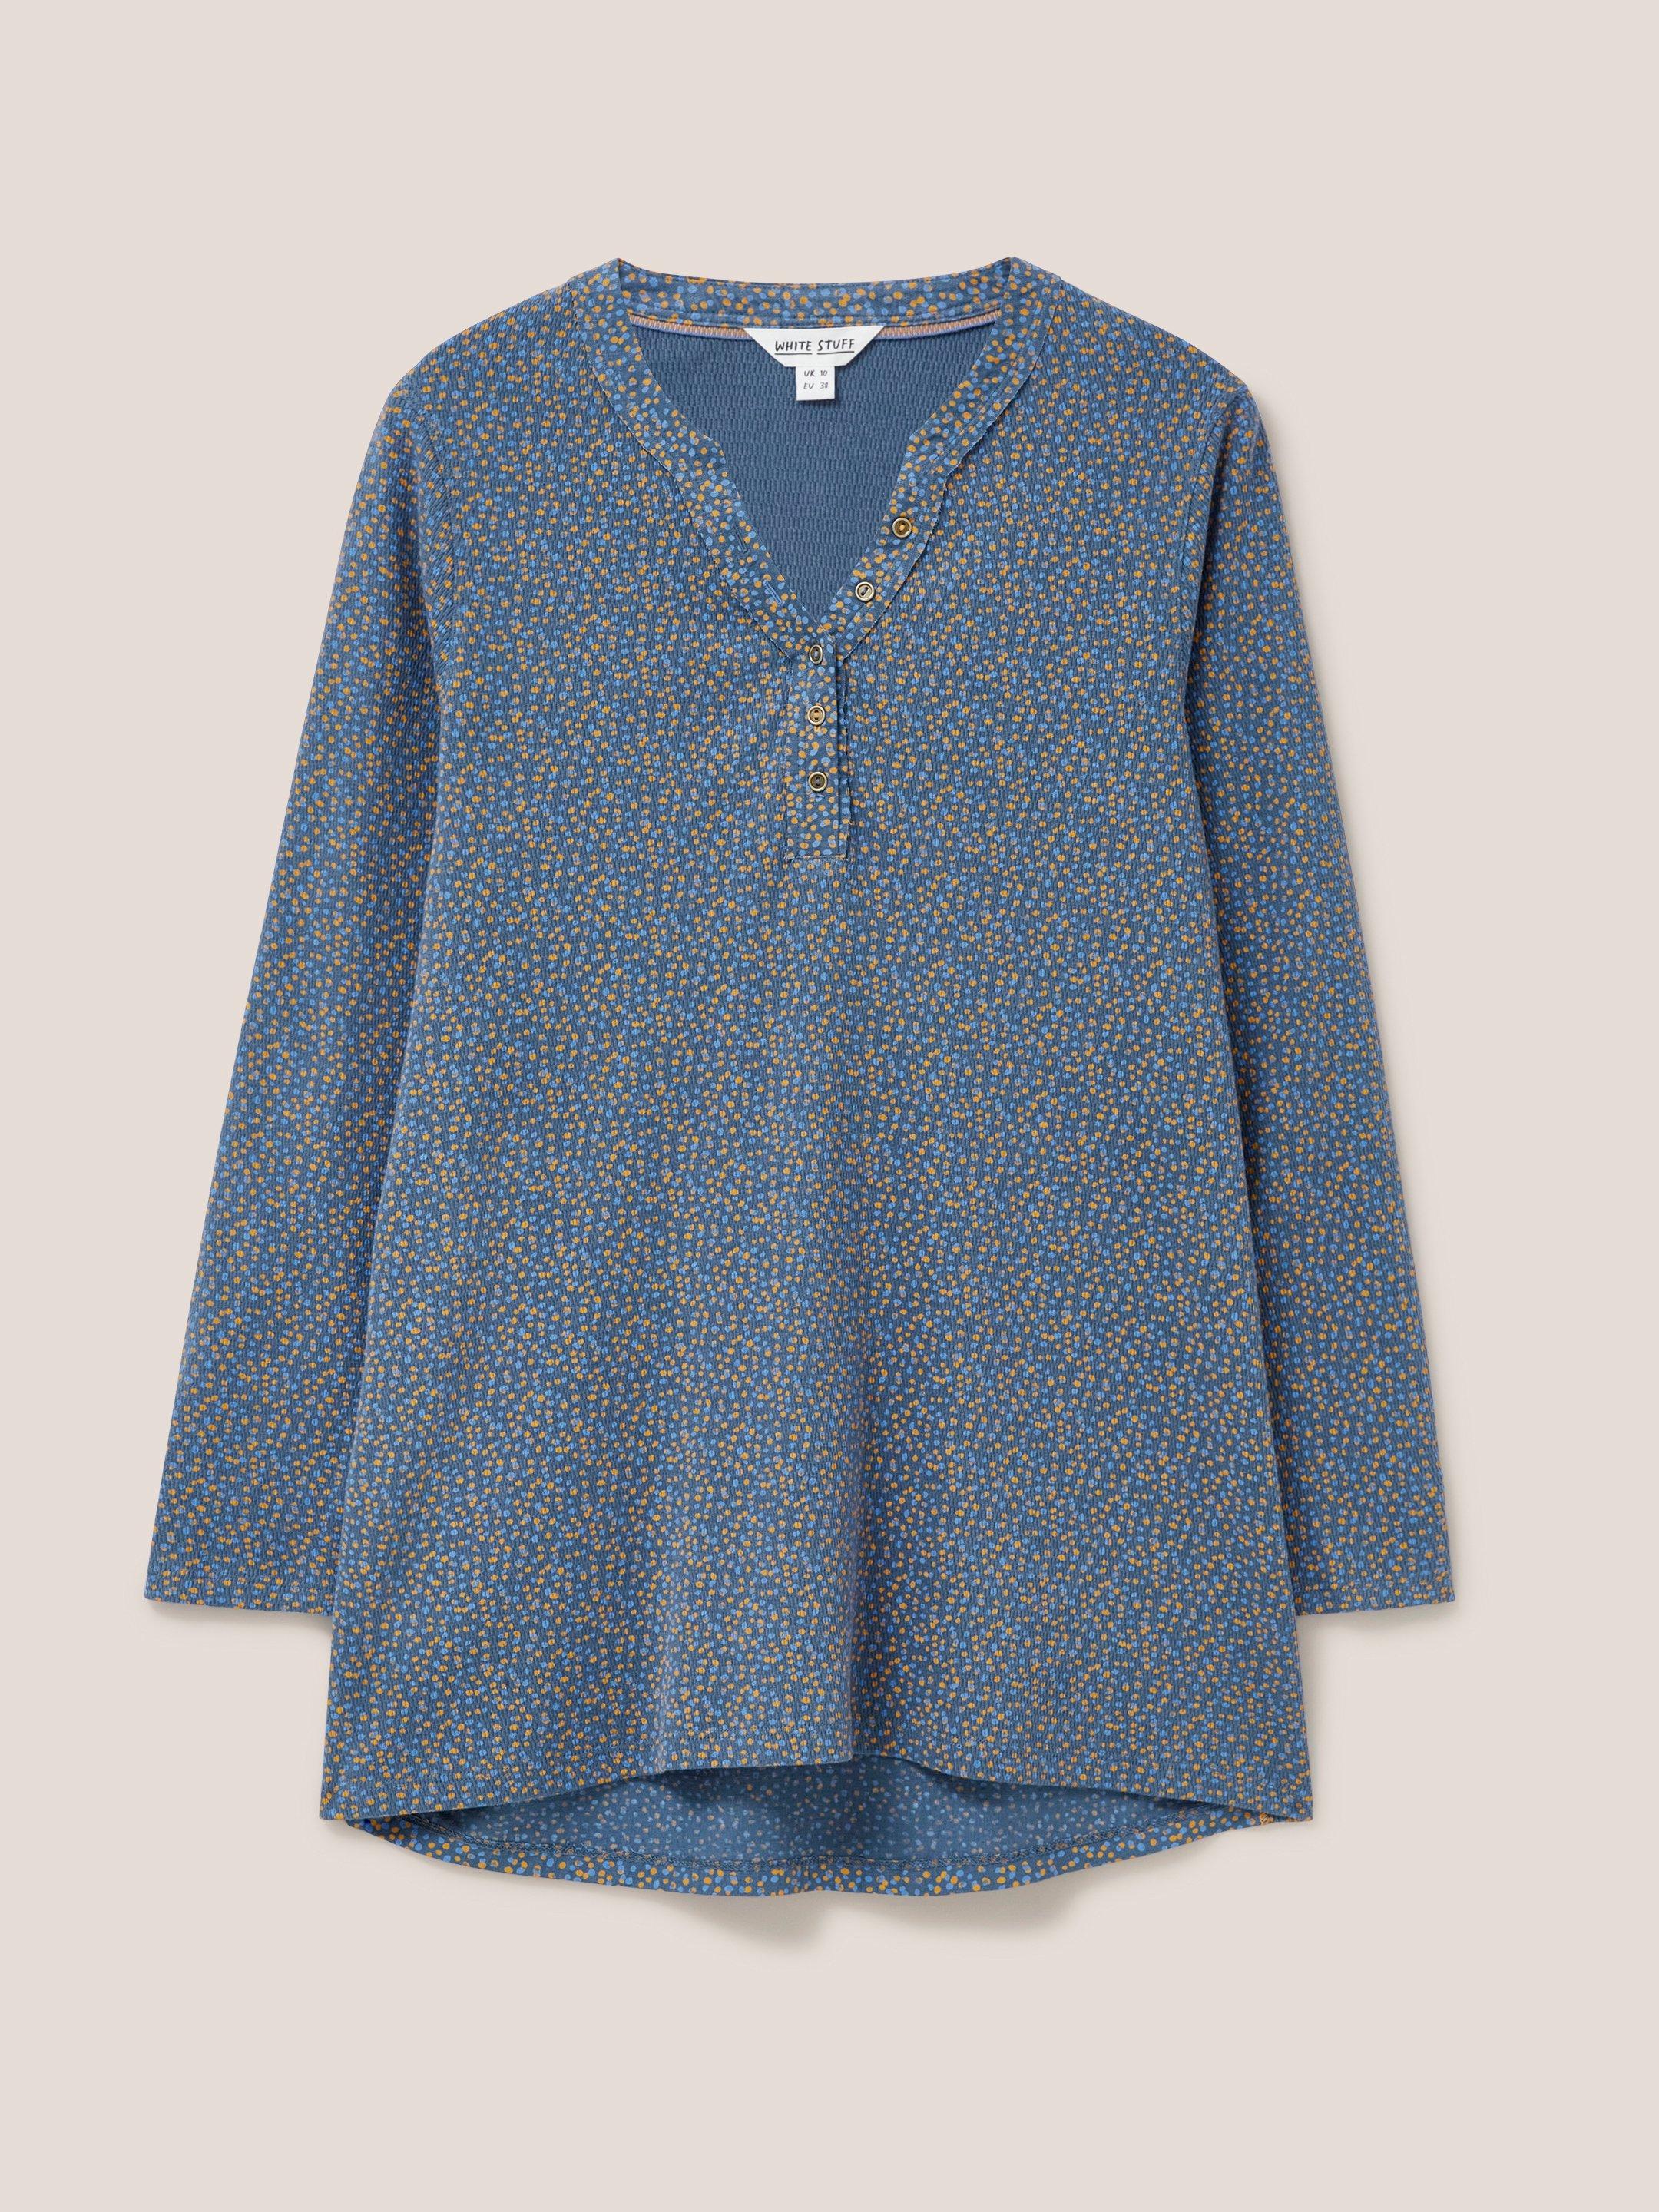 TAMMY TUNIC in BLUE PR - FLAT FRONT